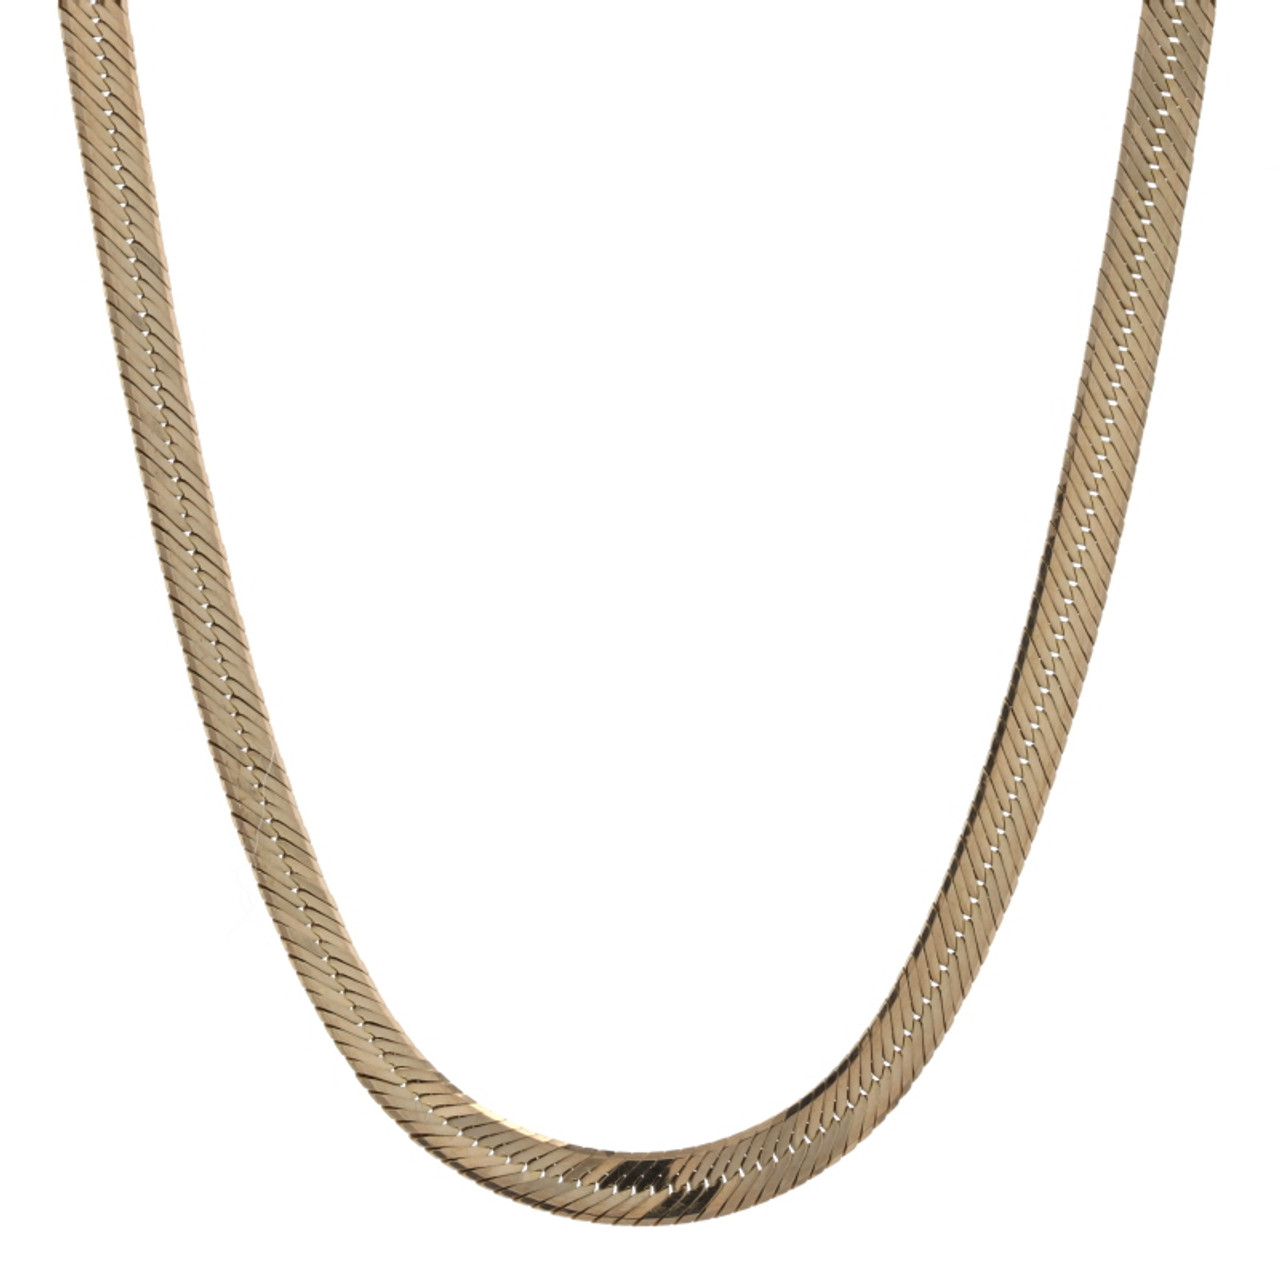 Lovely 4 Strand Herringbone 9ct Tricolour Gold 18 Chain Necklace - Etsy